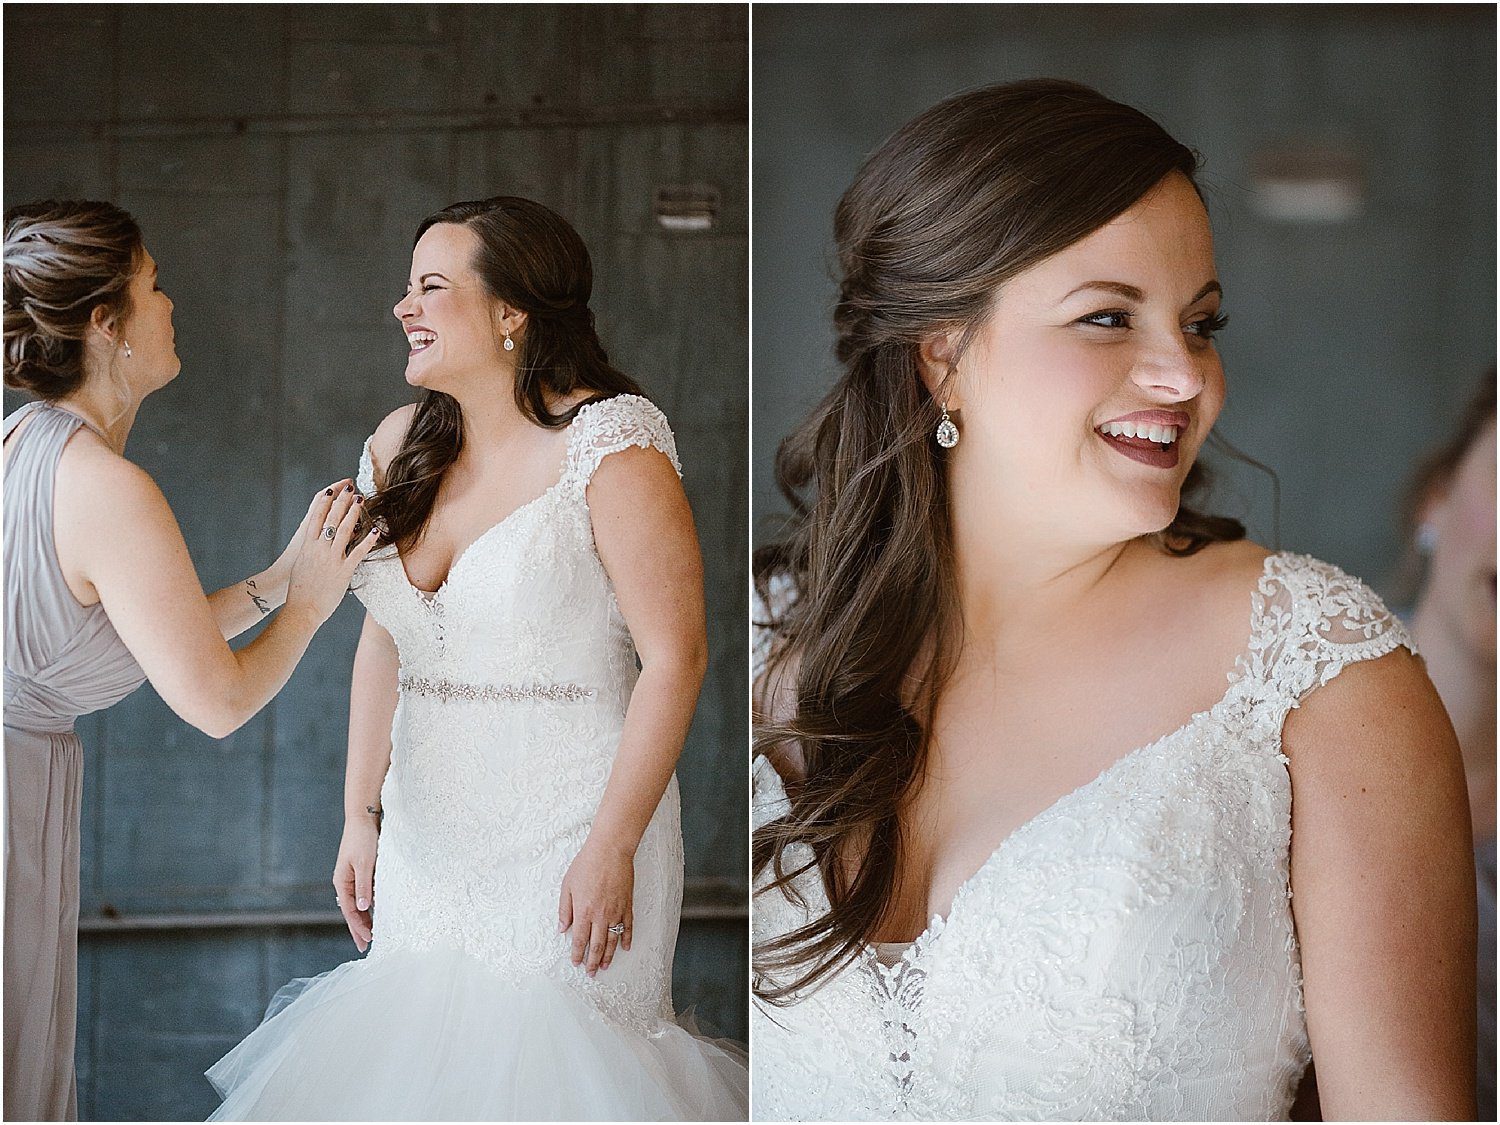 Bridal Photos in Downtown Knoxville Event Venue